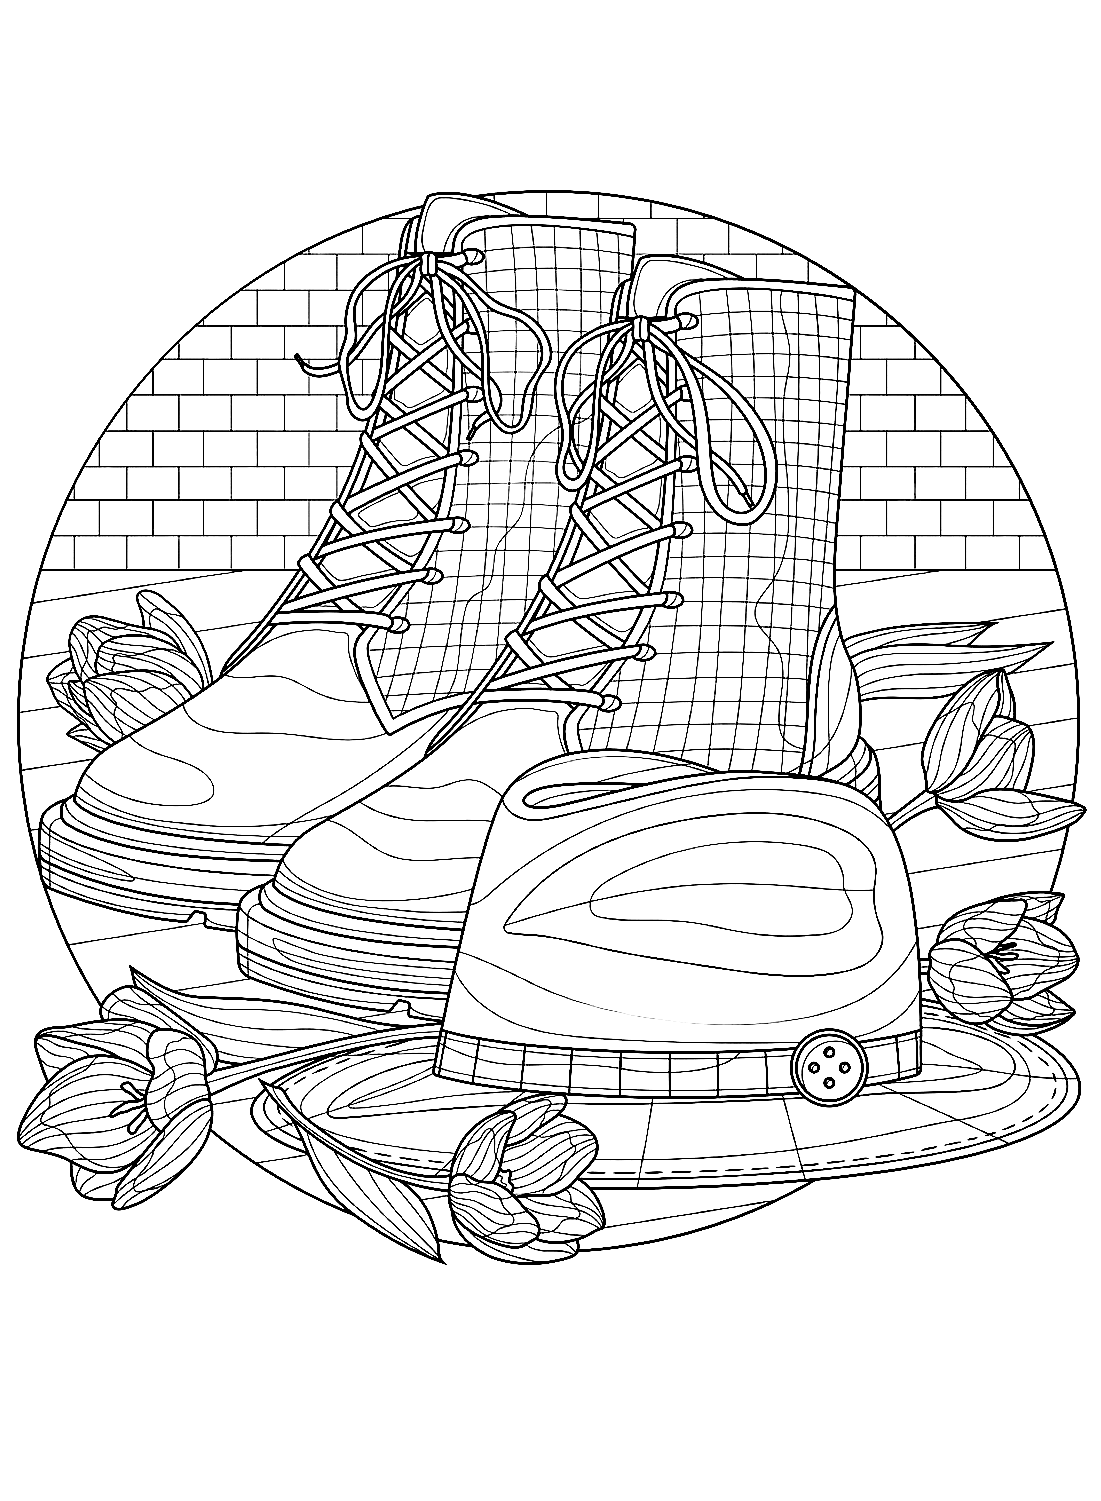 Boot Coloring Sheet for Kids Coloring Page